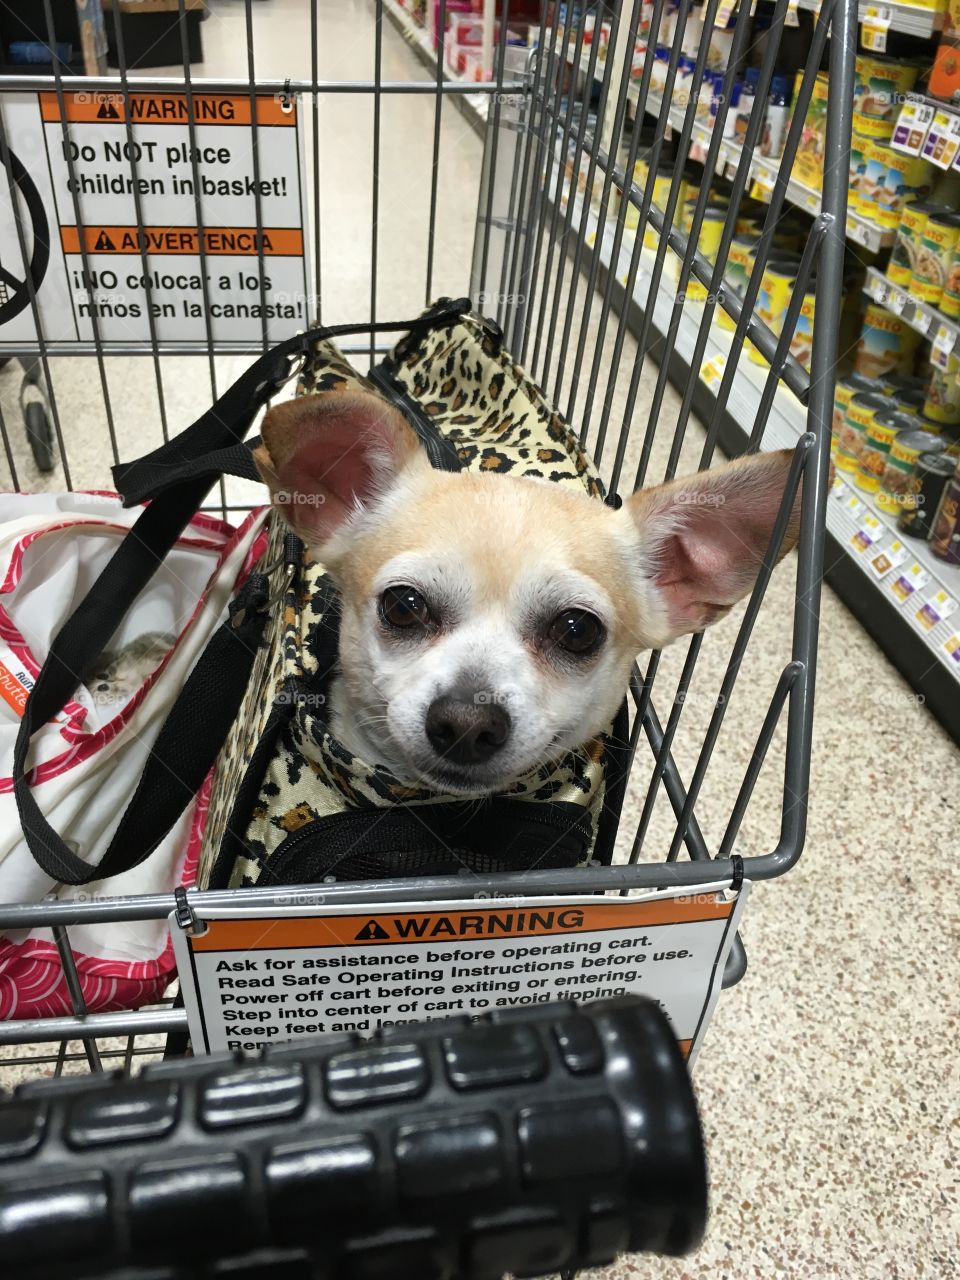 “Sara goes grocery shopping”—Sarafina was one of 12 chihuahuas who were left at the shelter after their elderly owner died. All of the others had already been adopted, but Sara was waiting for me. Best dog ever! We go everywhere together.